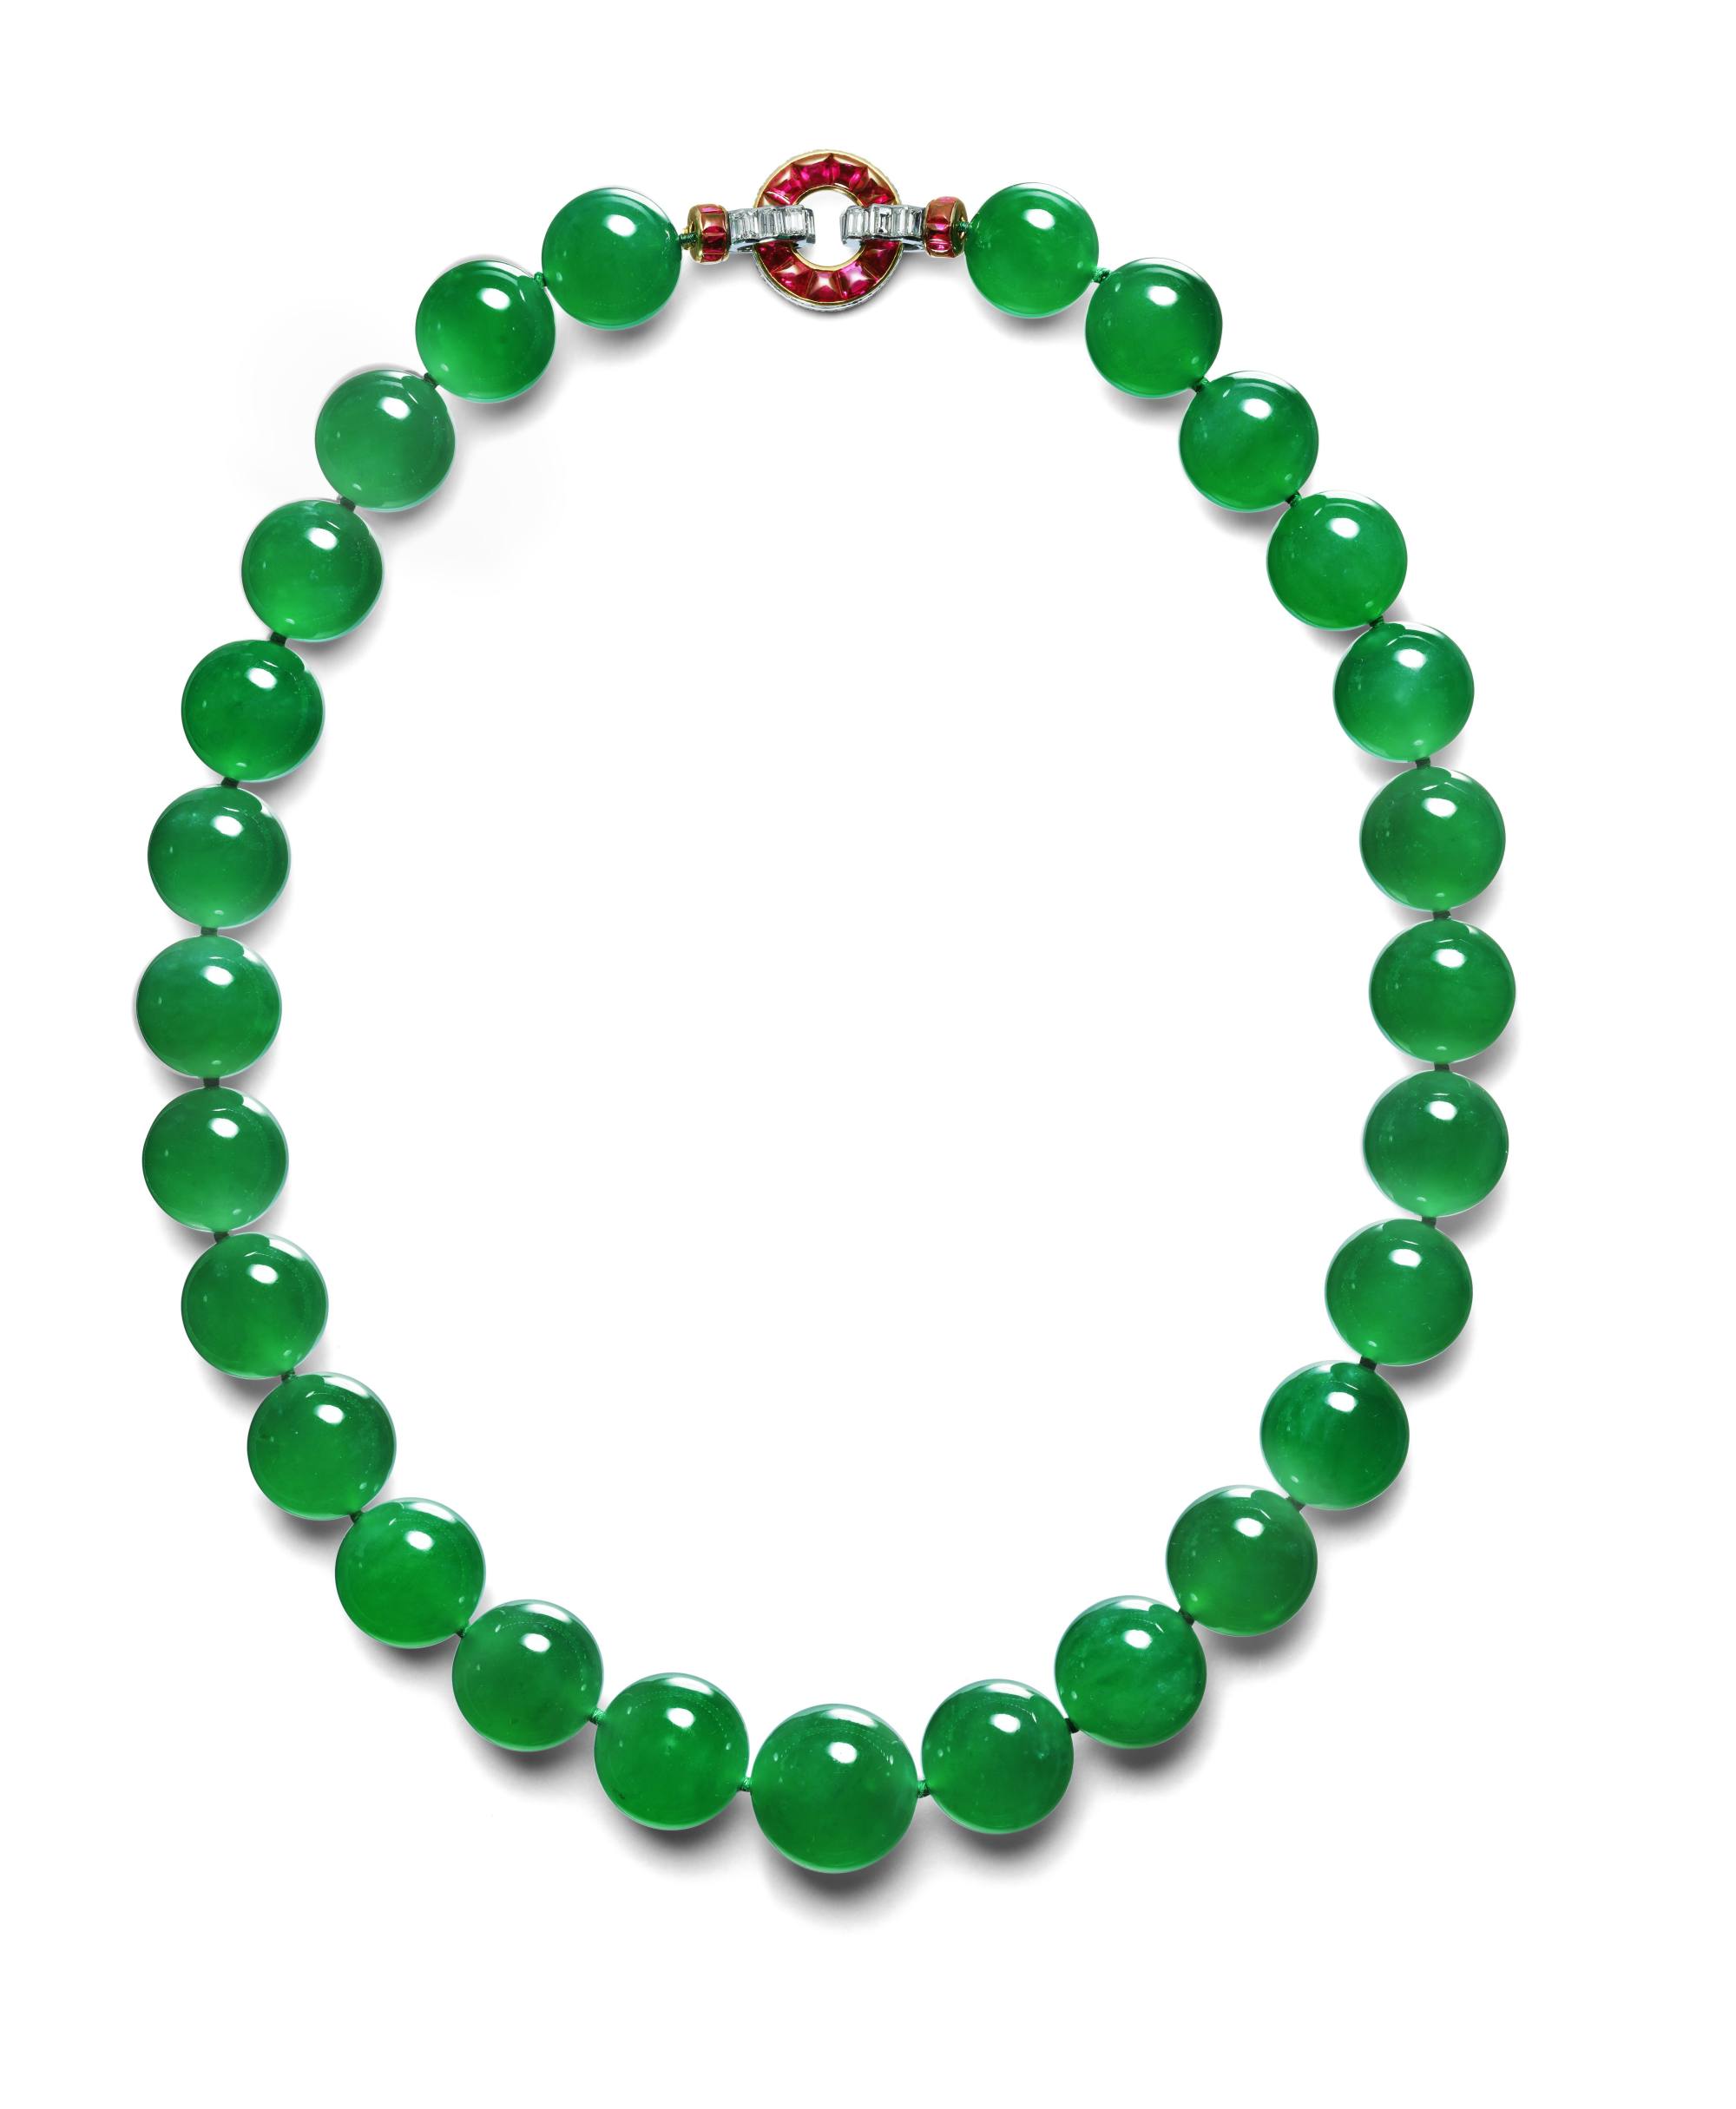 How Chinese arts and culture influenced Cartier jewellery and women’s ...